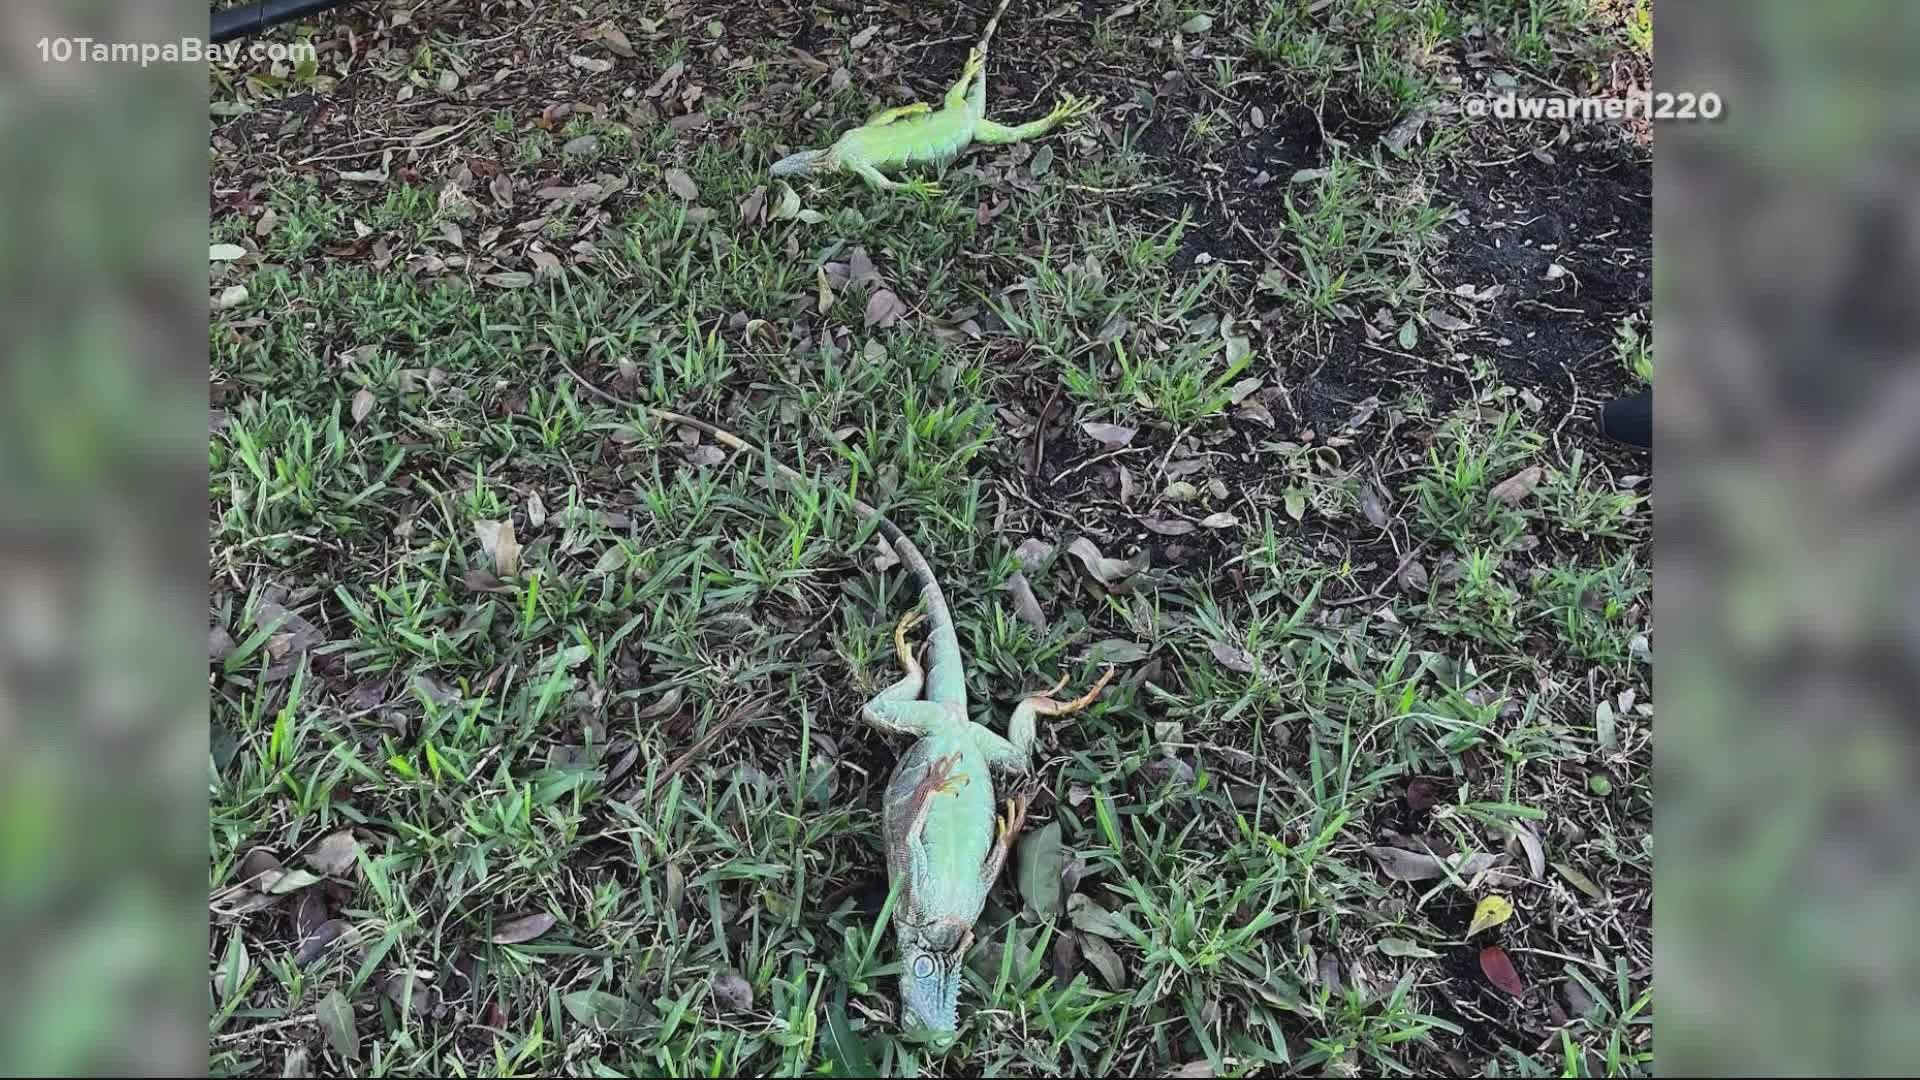 When it gets cold, iguanas go into a sort of suspended animation mode and fall out of trees.